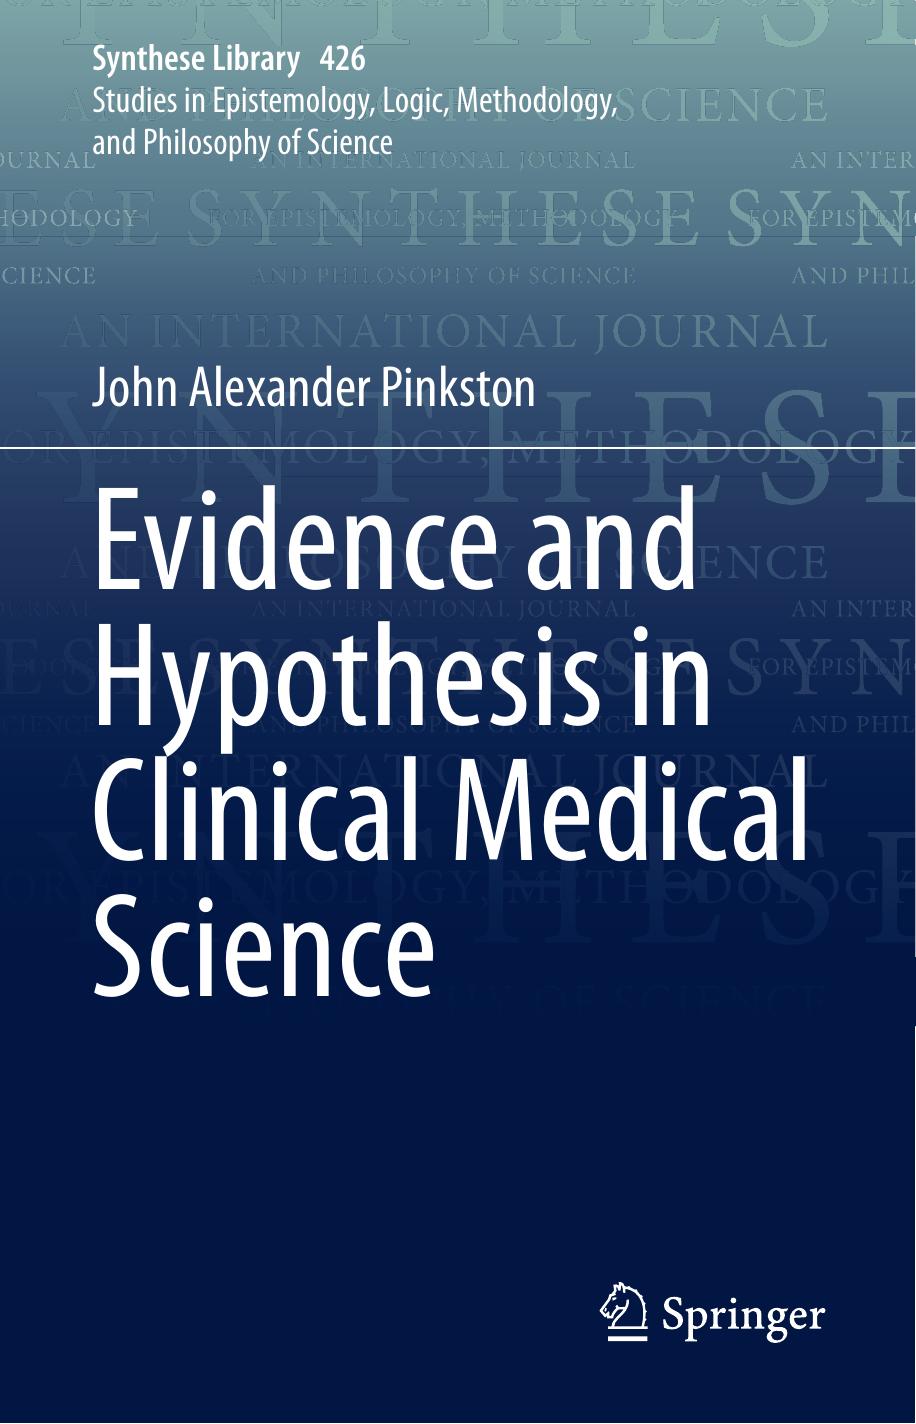 Evidence and Hypothesis in Clinical Medical Science by John Alexander Pinkston